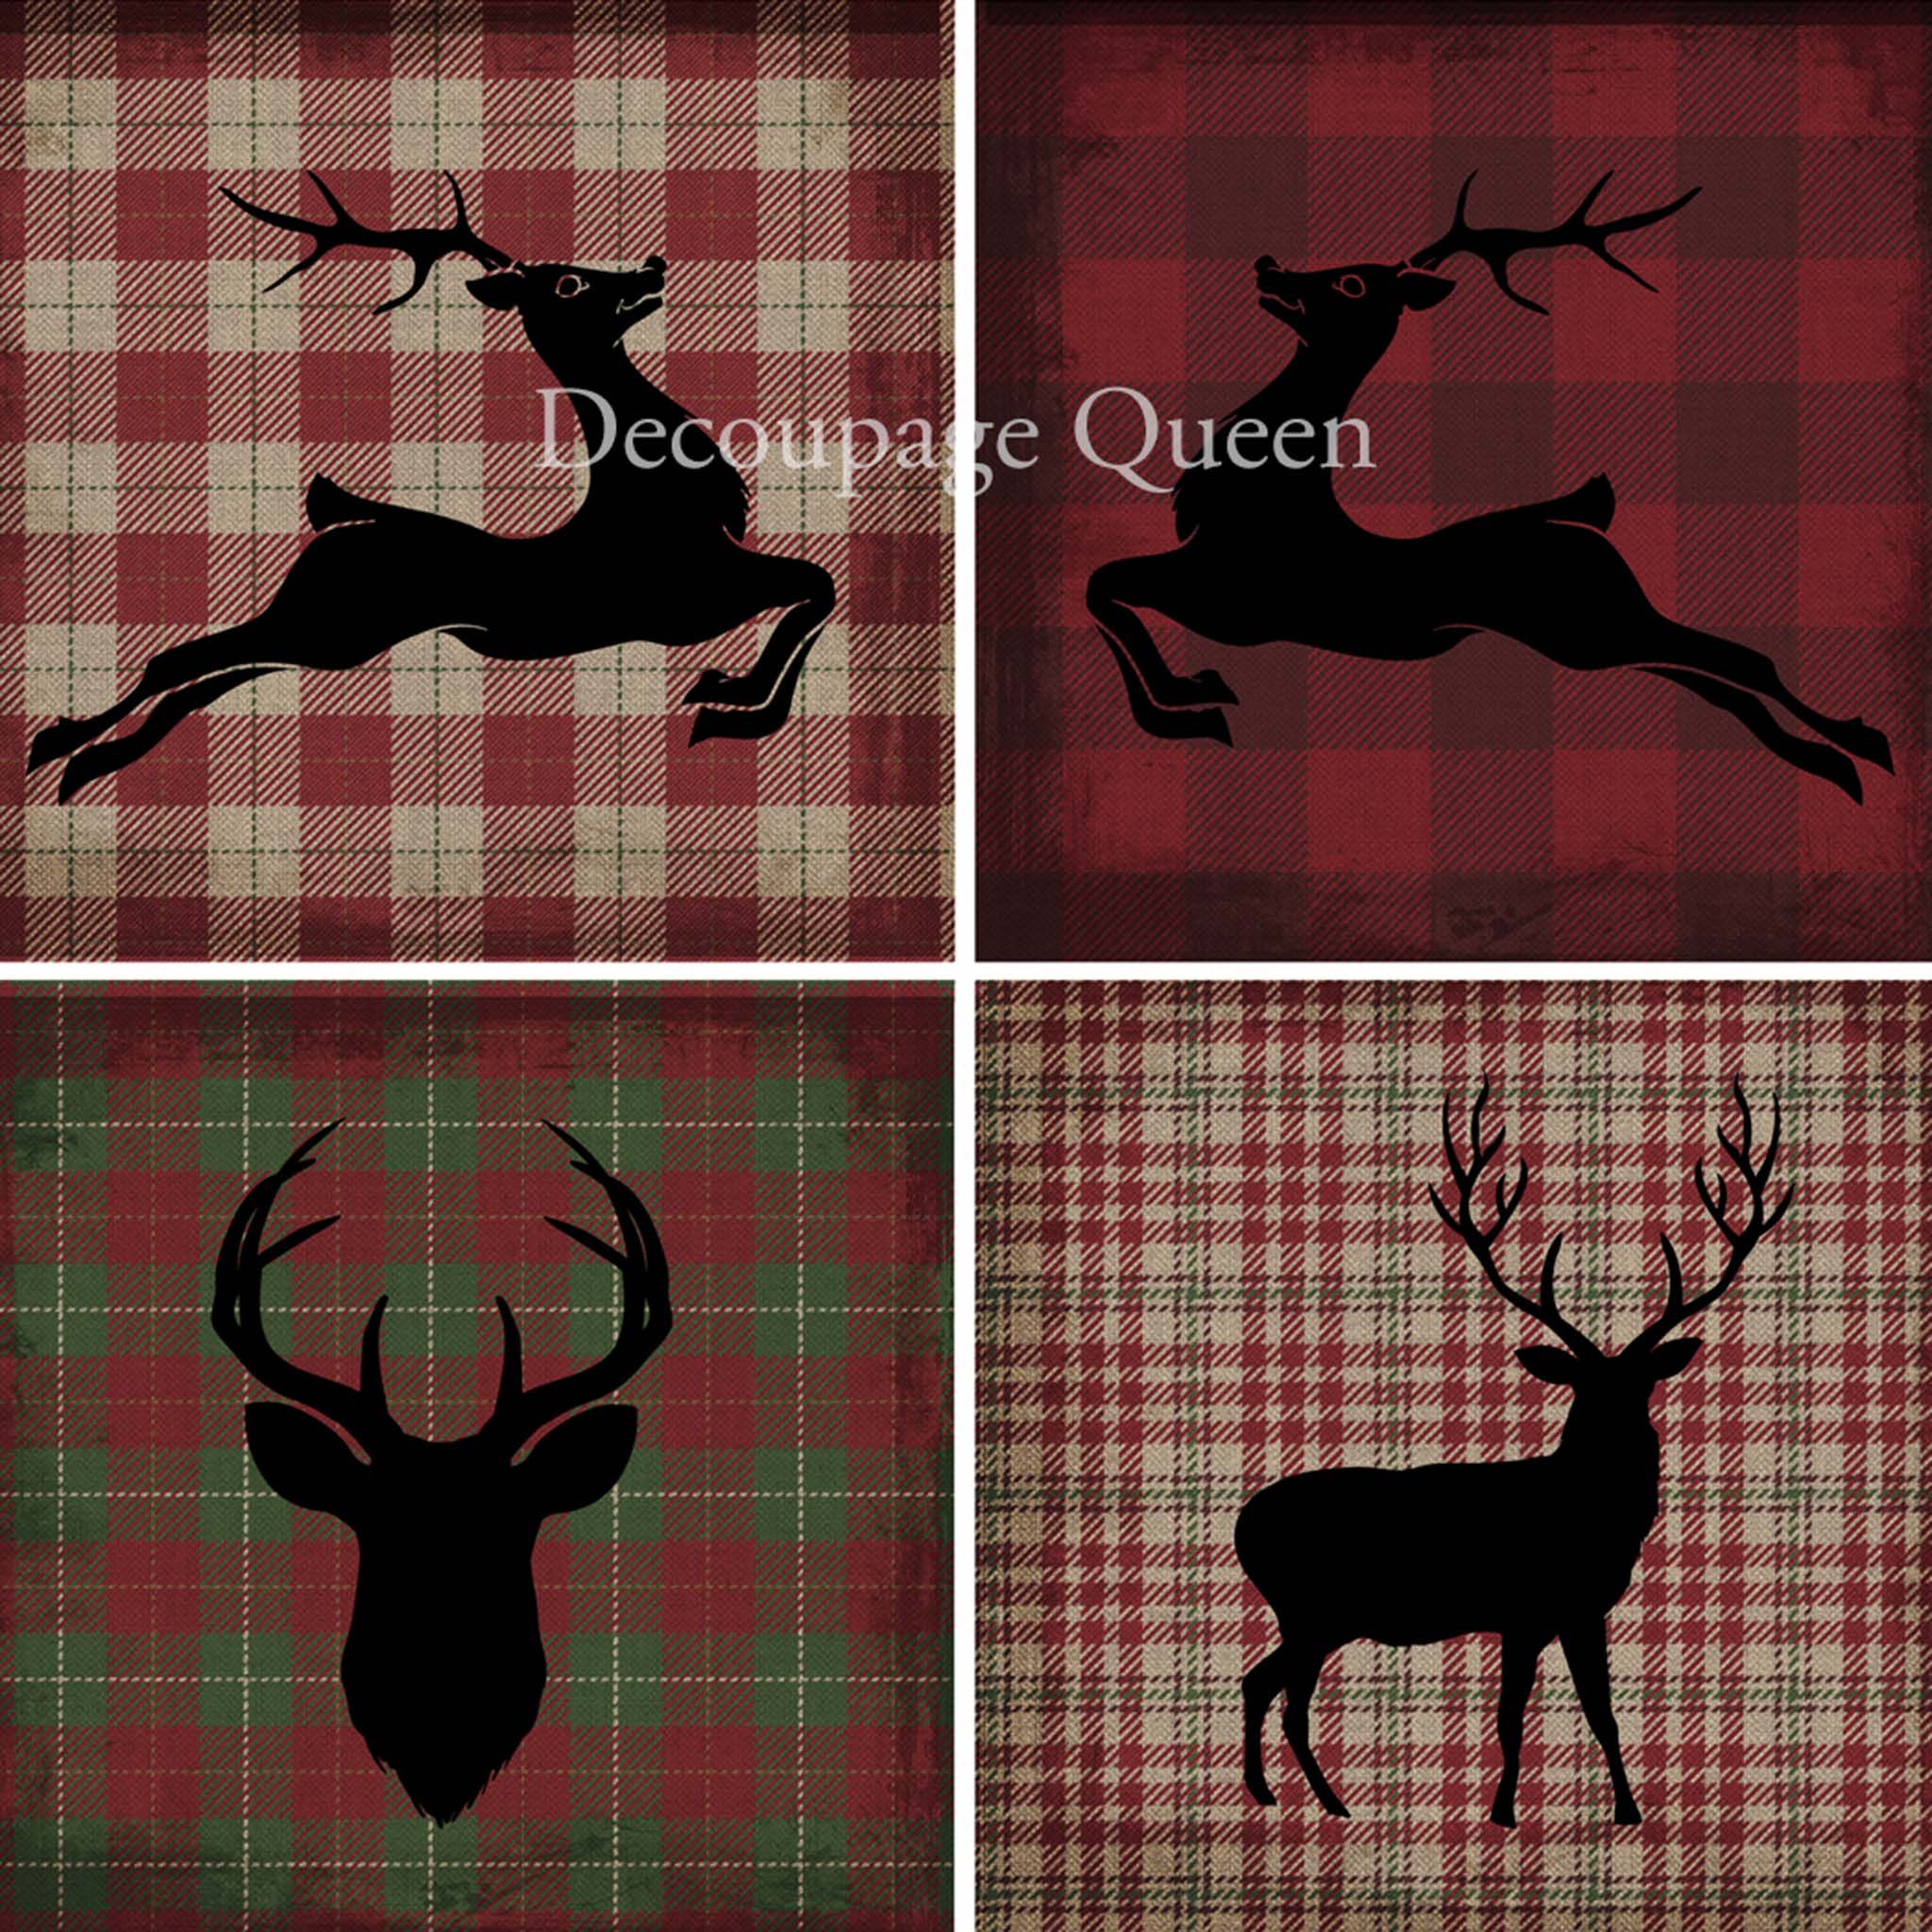 A3 rice paper that features 4 festive red plaid squares each with silhouettes of reindeer.